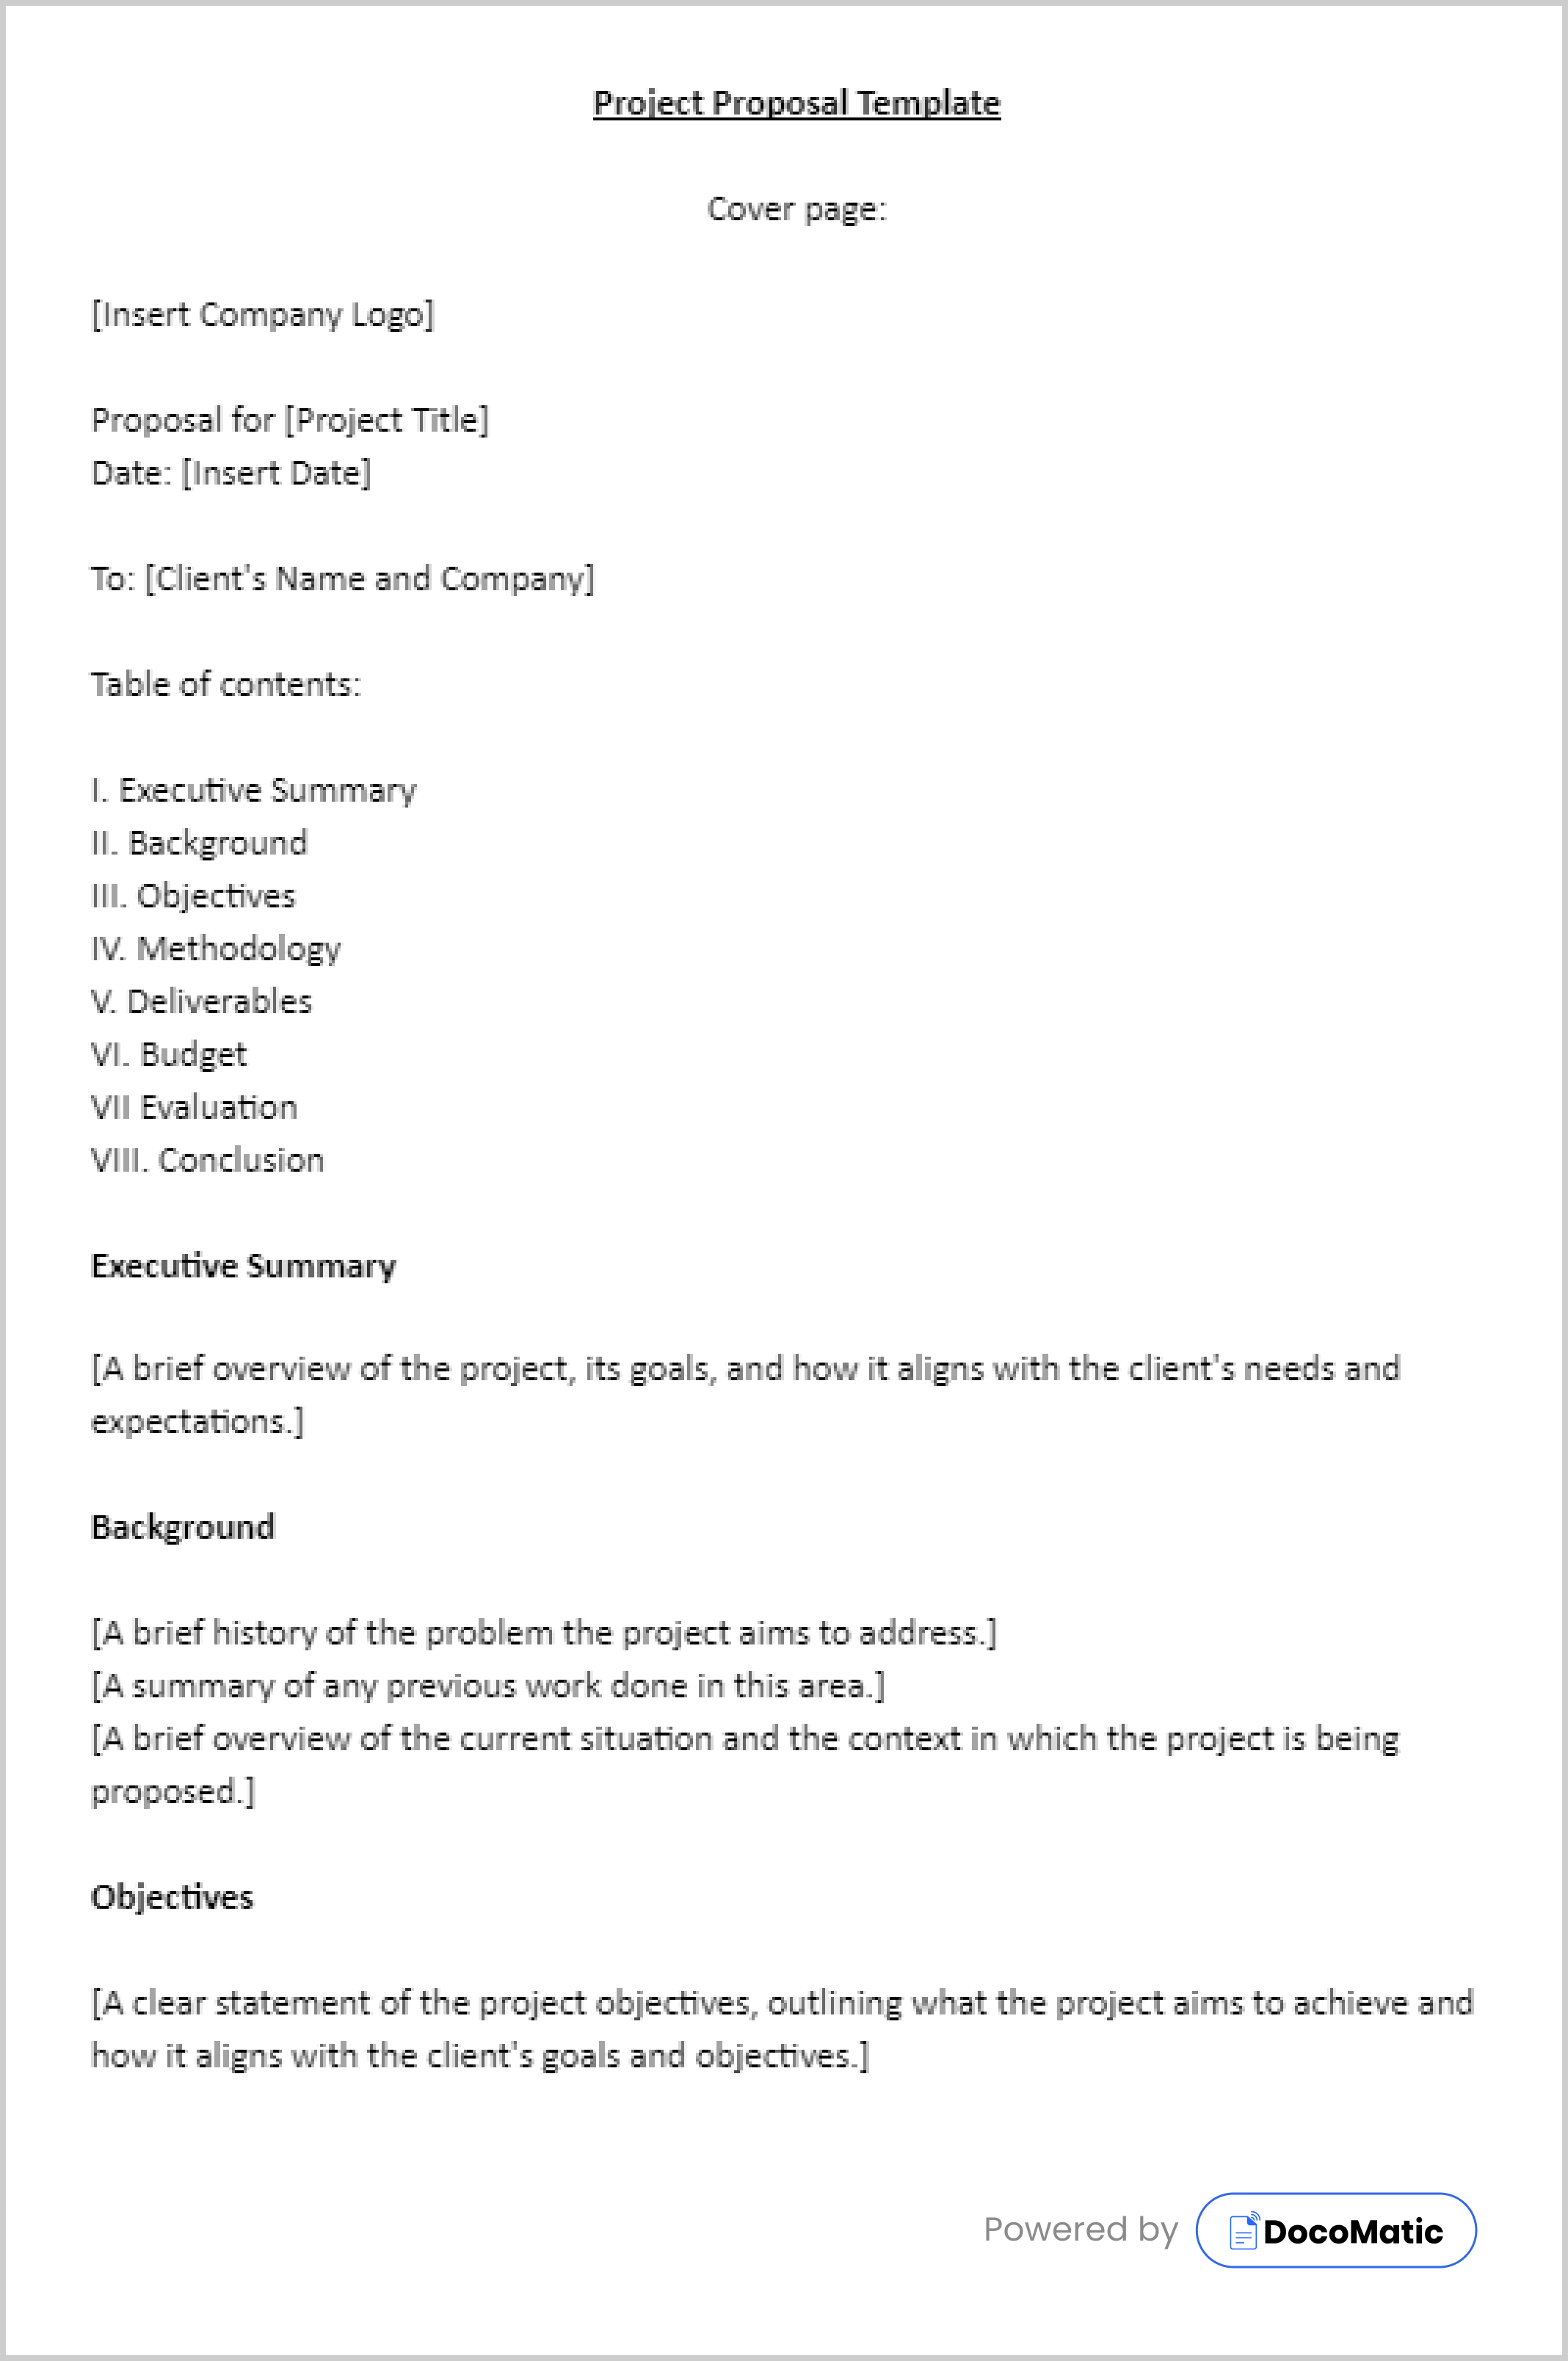 Free project proposal template